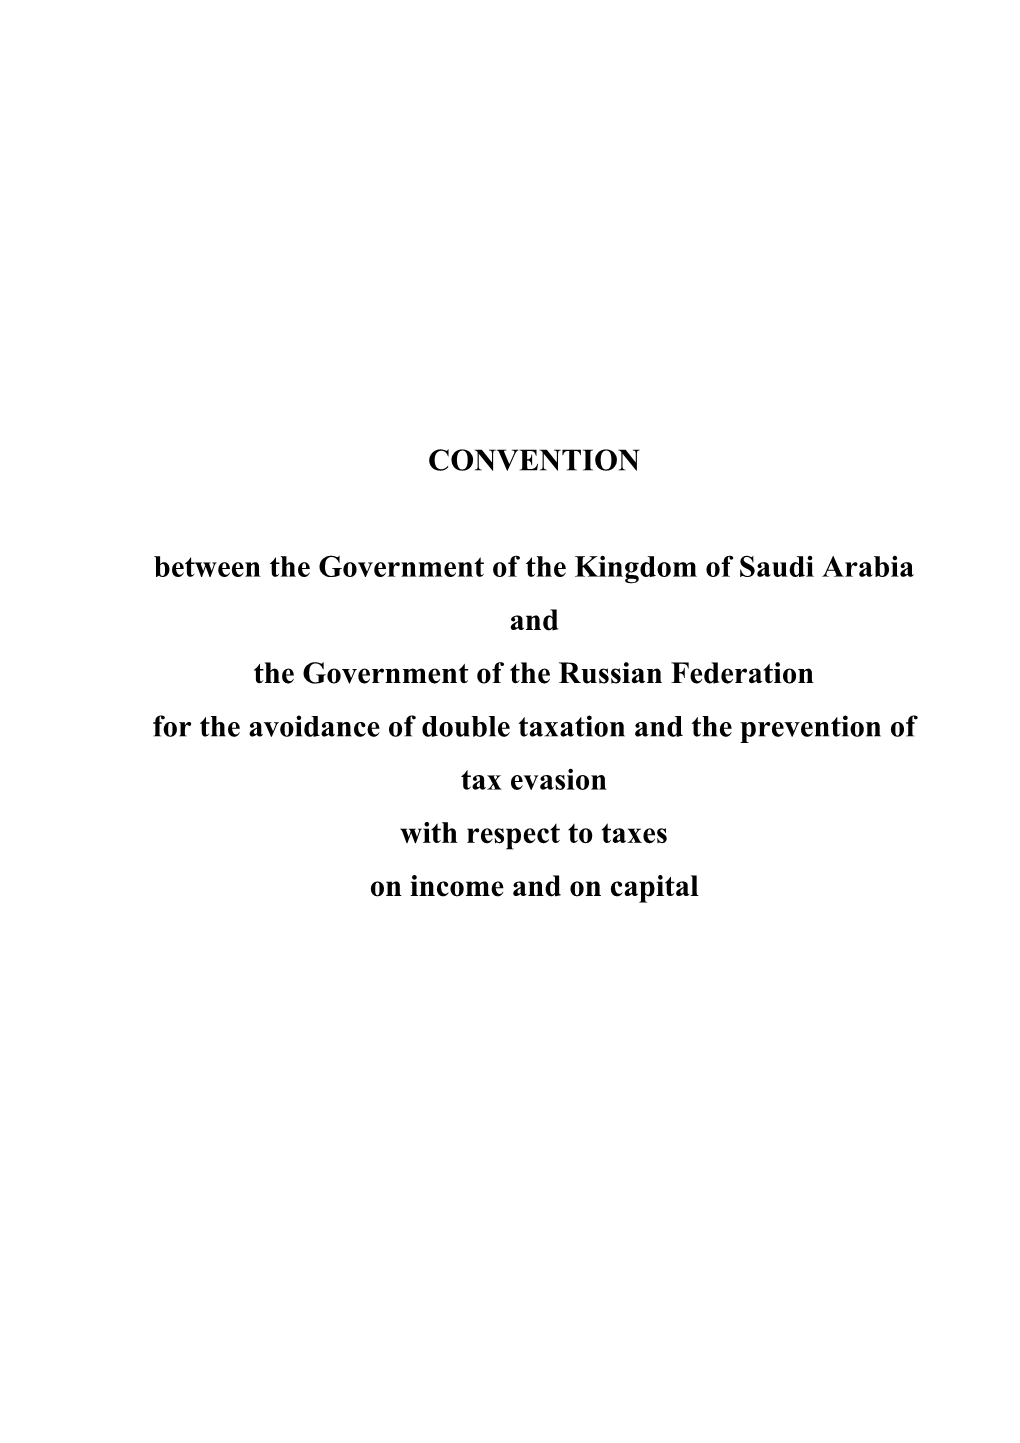 Agreement Between the Kingdom of Saudi Arabia and Russia for the Avoidance of Double Taxation